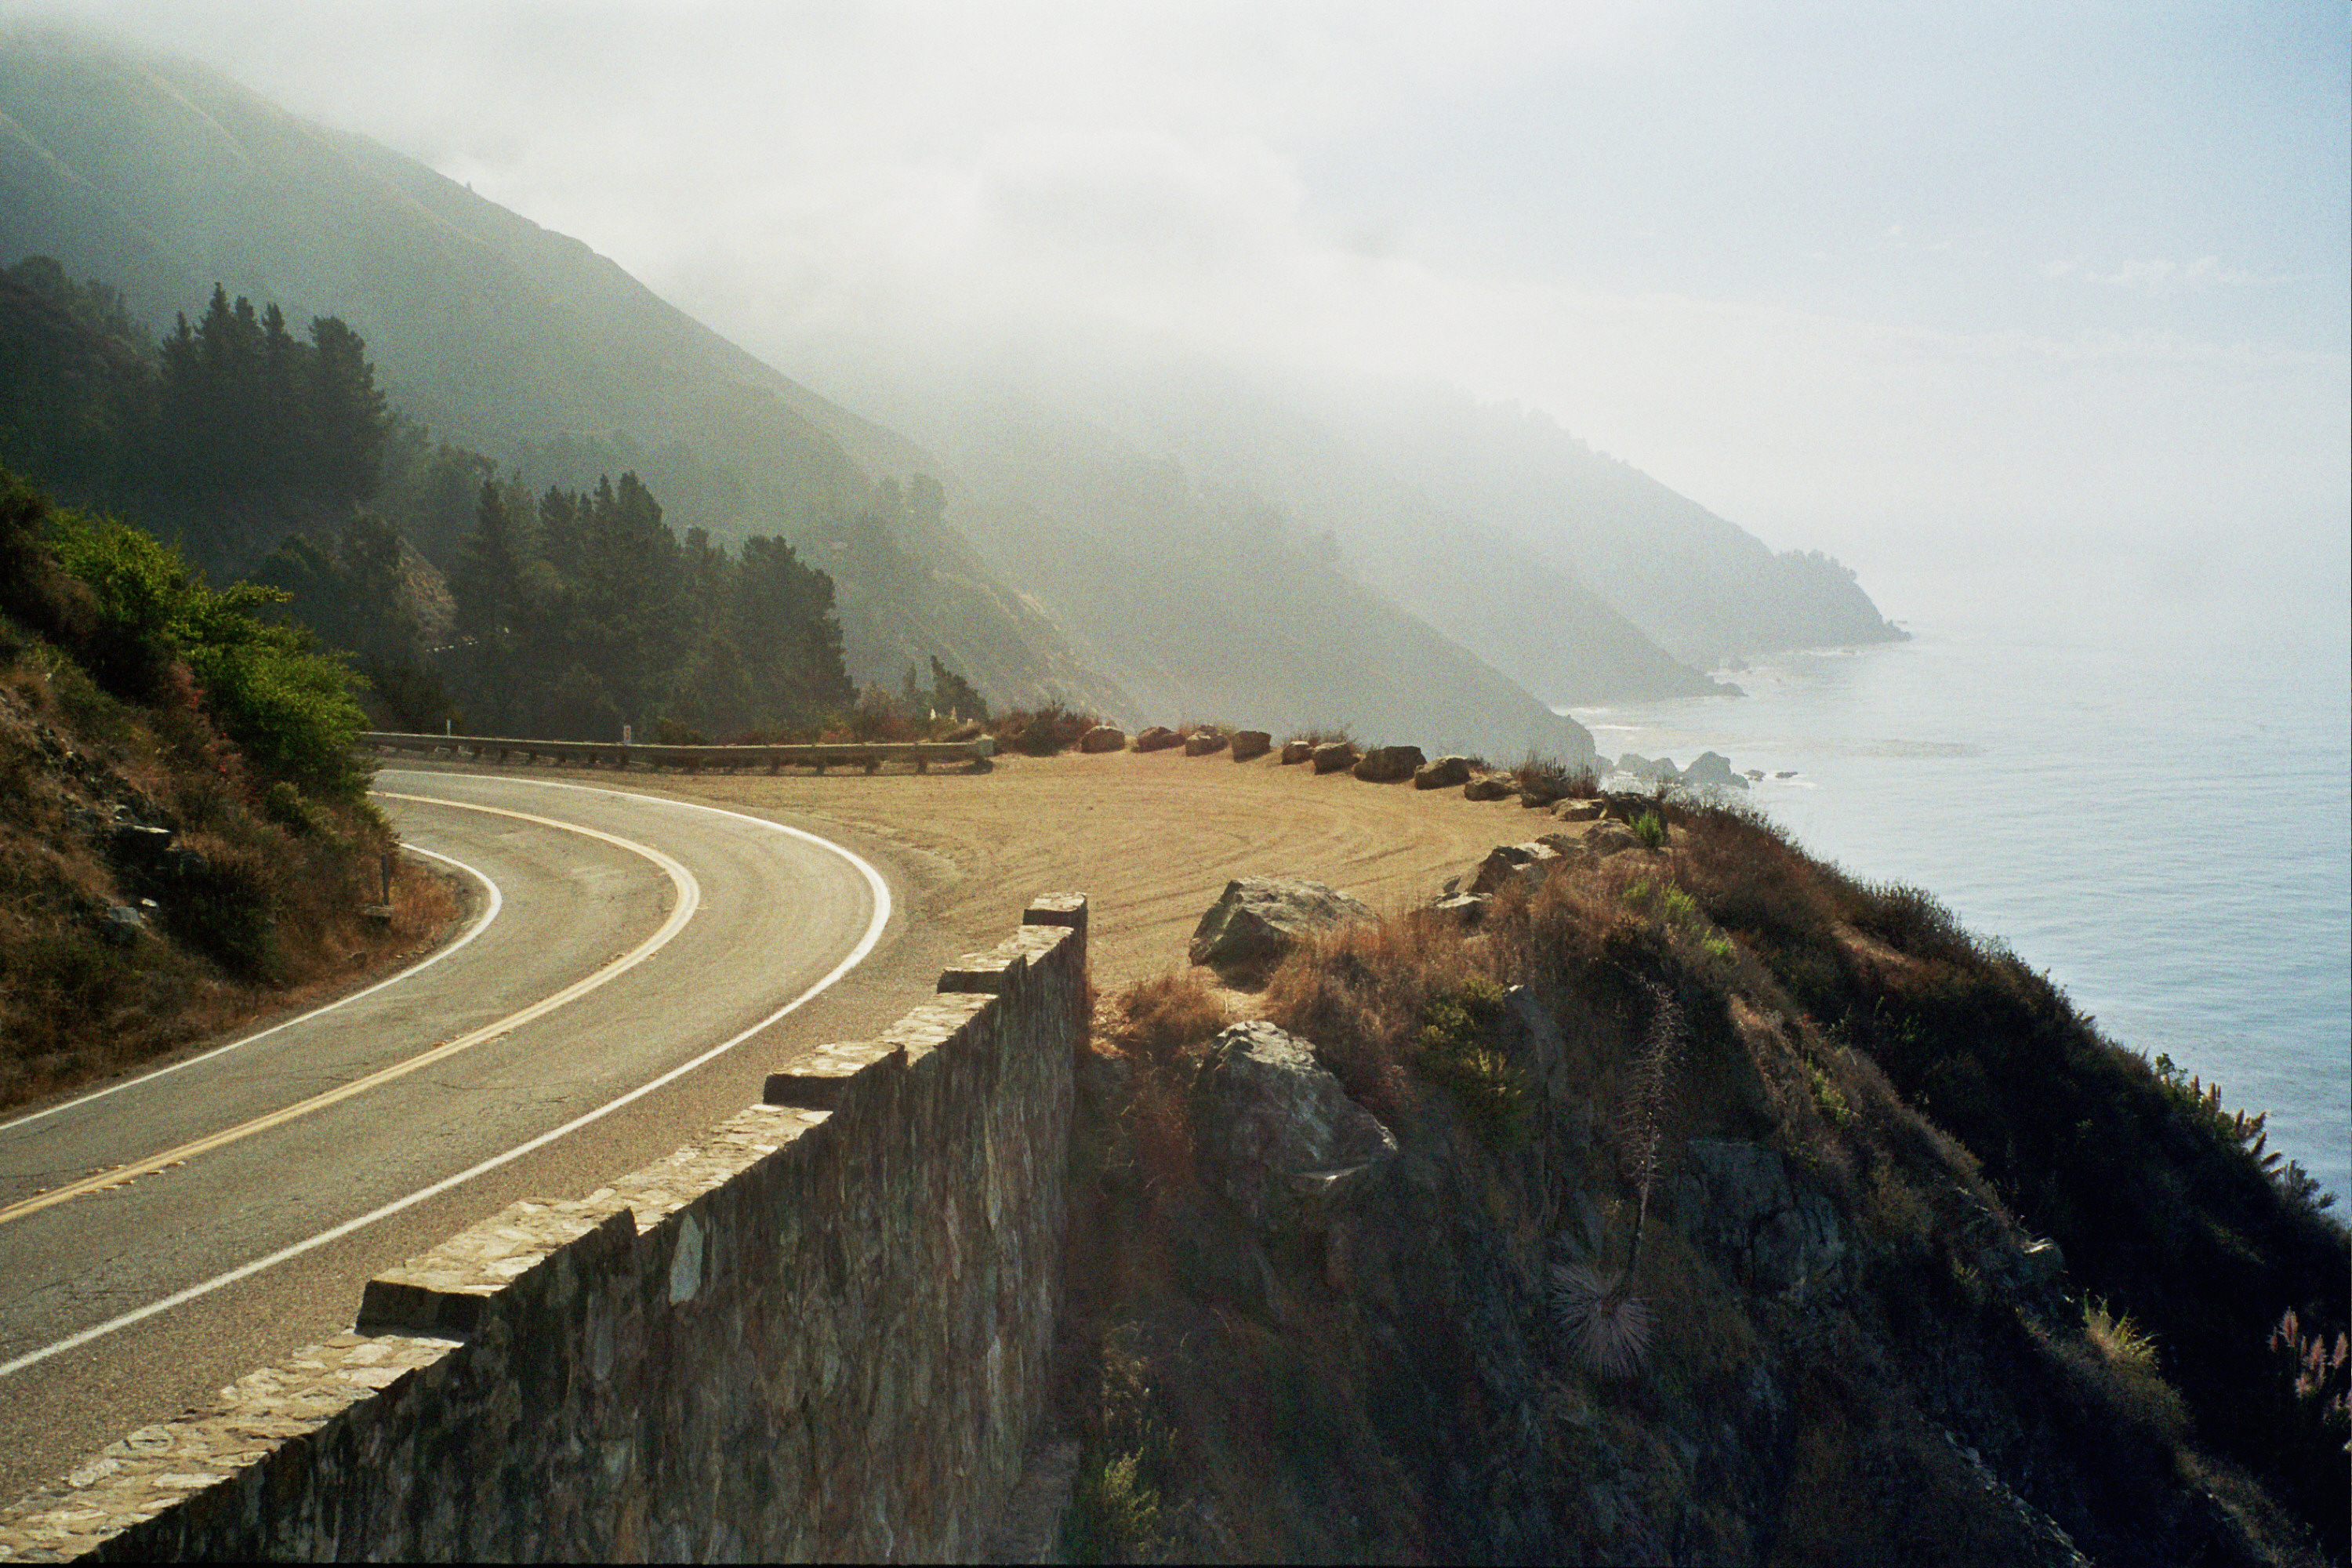 Curvy coastal road with a misty mountain backdrop and a calm ocean to one side